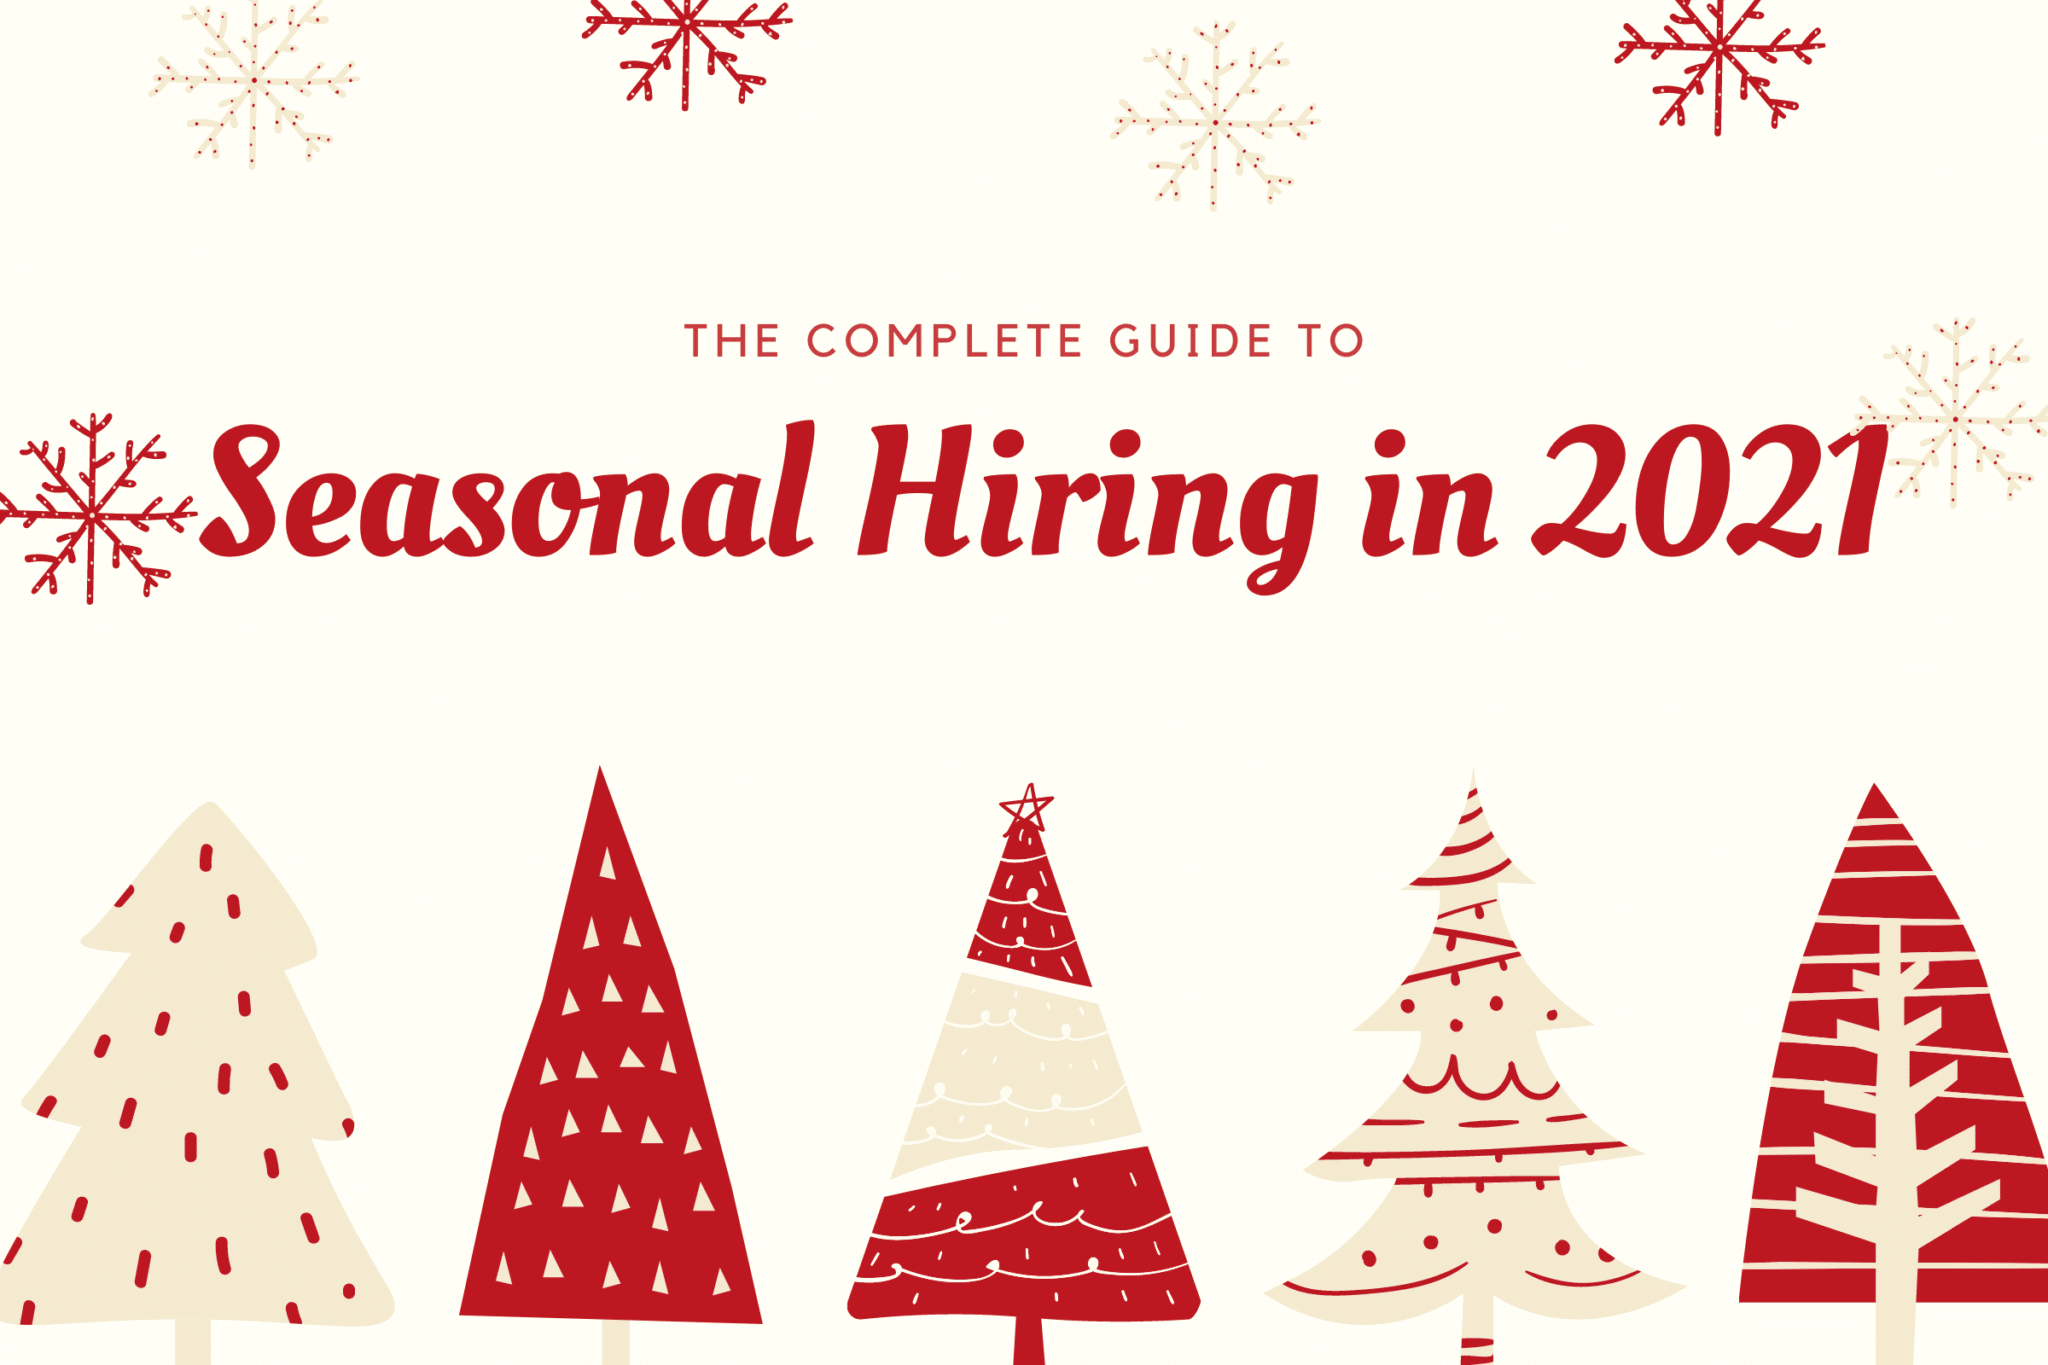 The Complete Guide to Seasonal Hiring in 2021